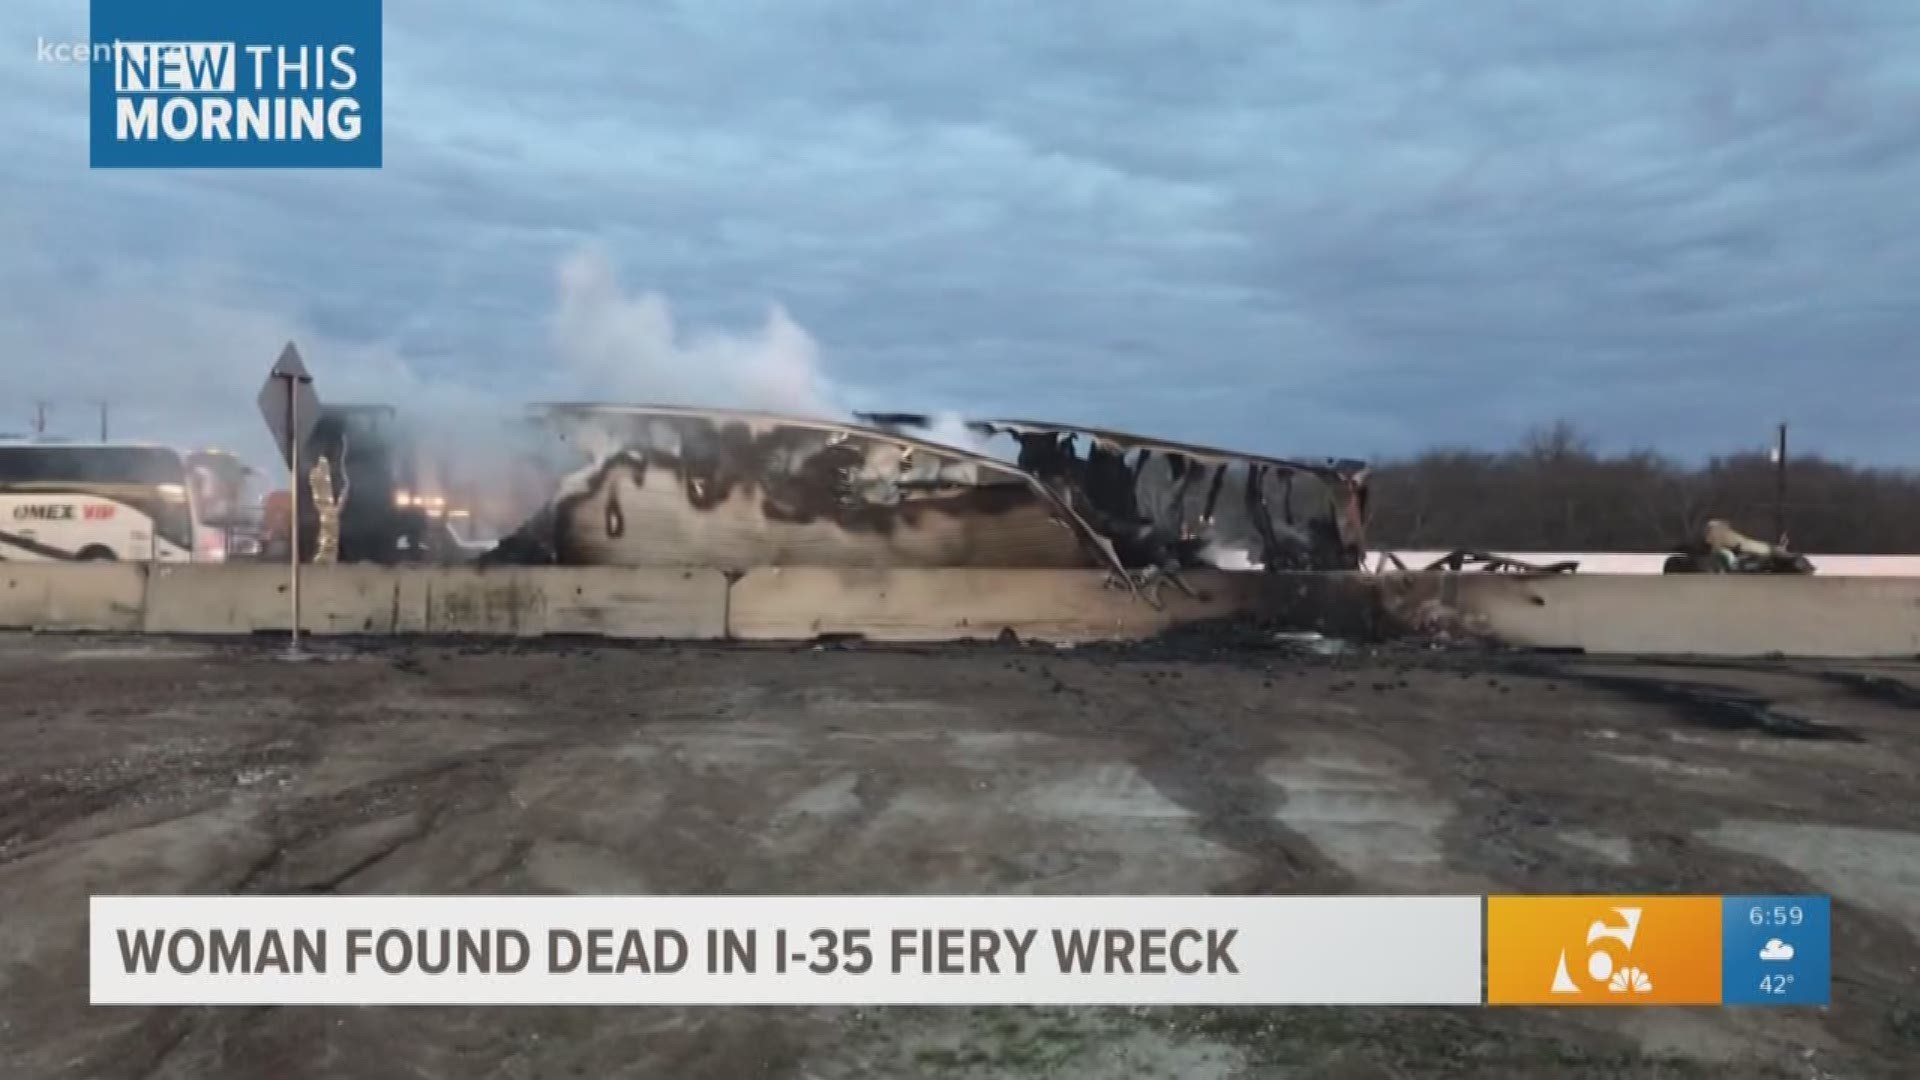 Bruceville-Eddy Fire and Rescue confirmed Thursday that the passenger involved in a semi-trailer crash on I-35 on Wednesday died at the scene, and the driver was transported to Parkland Hospital to be treated for severe burns.